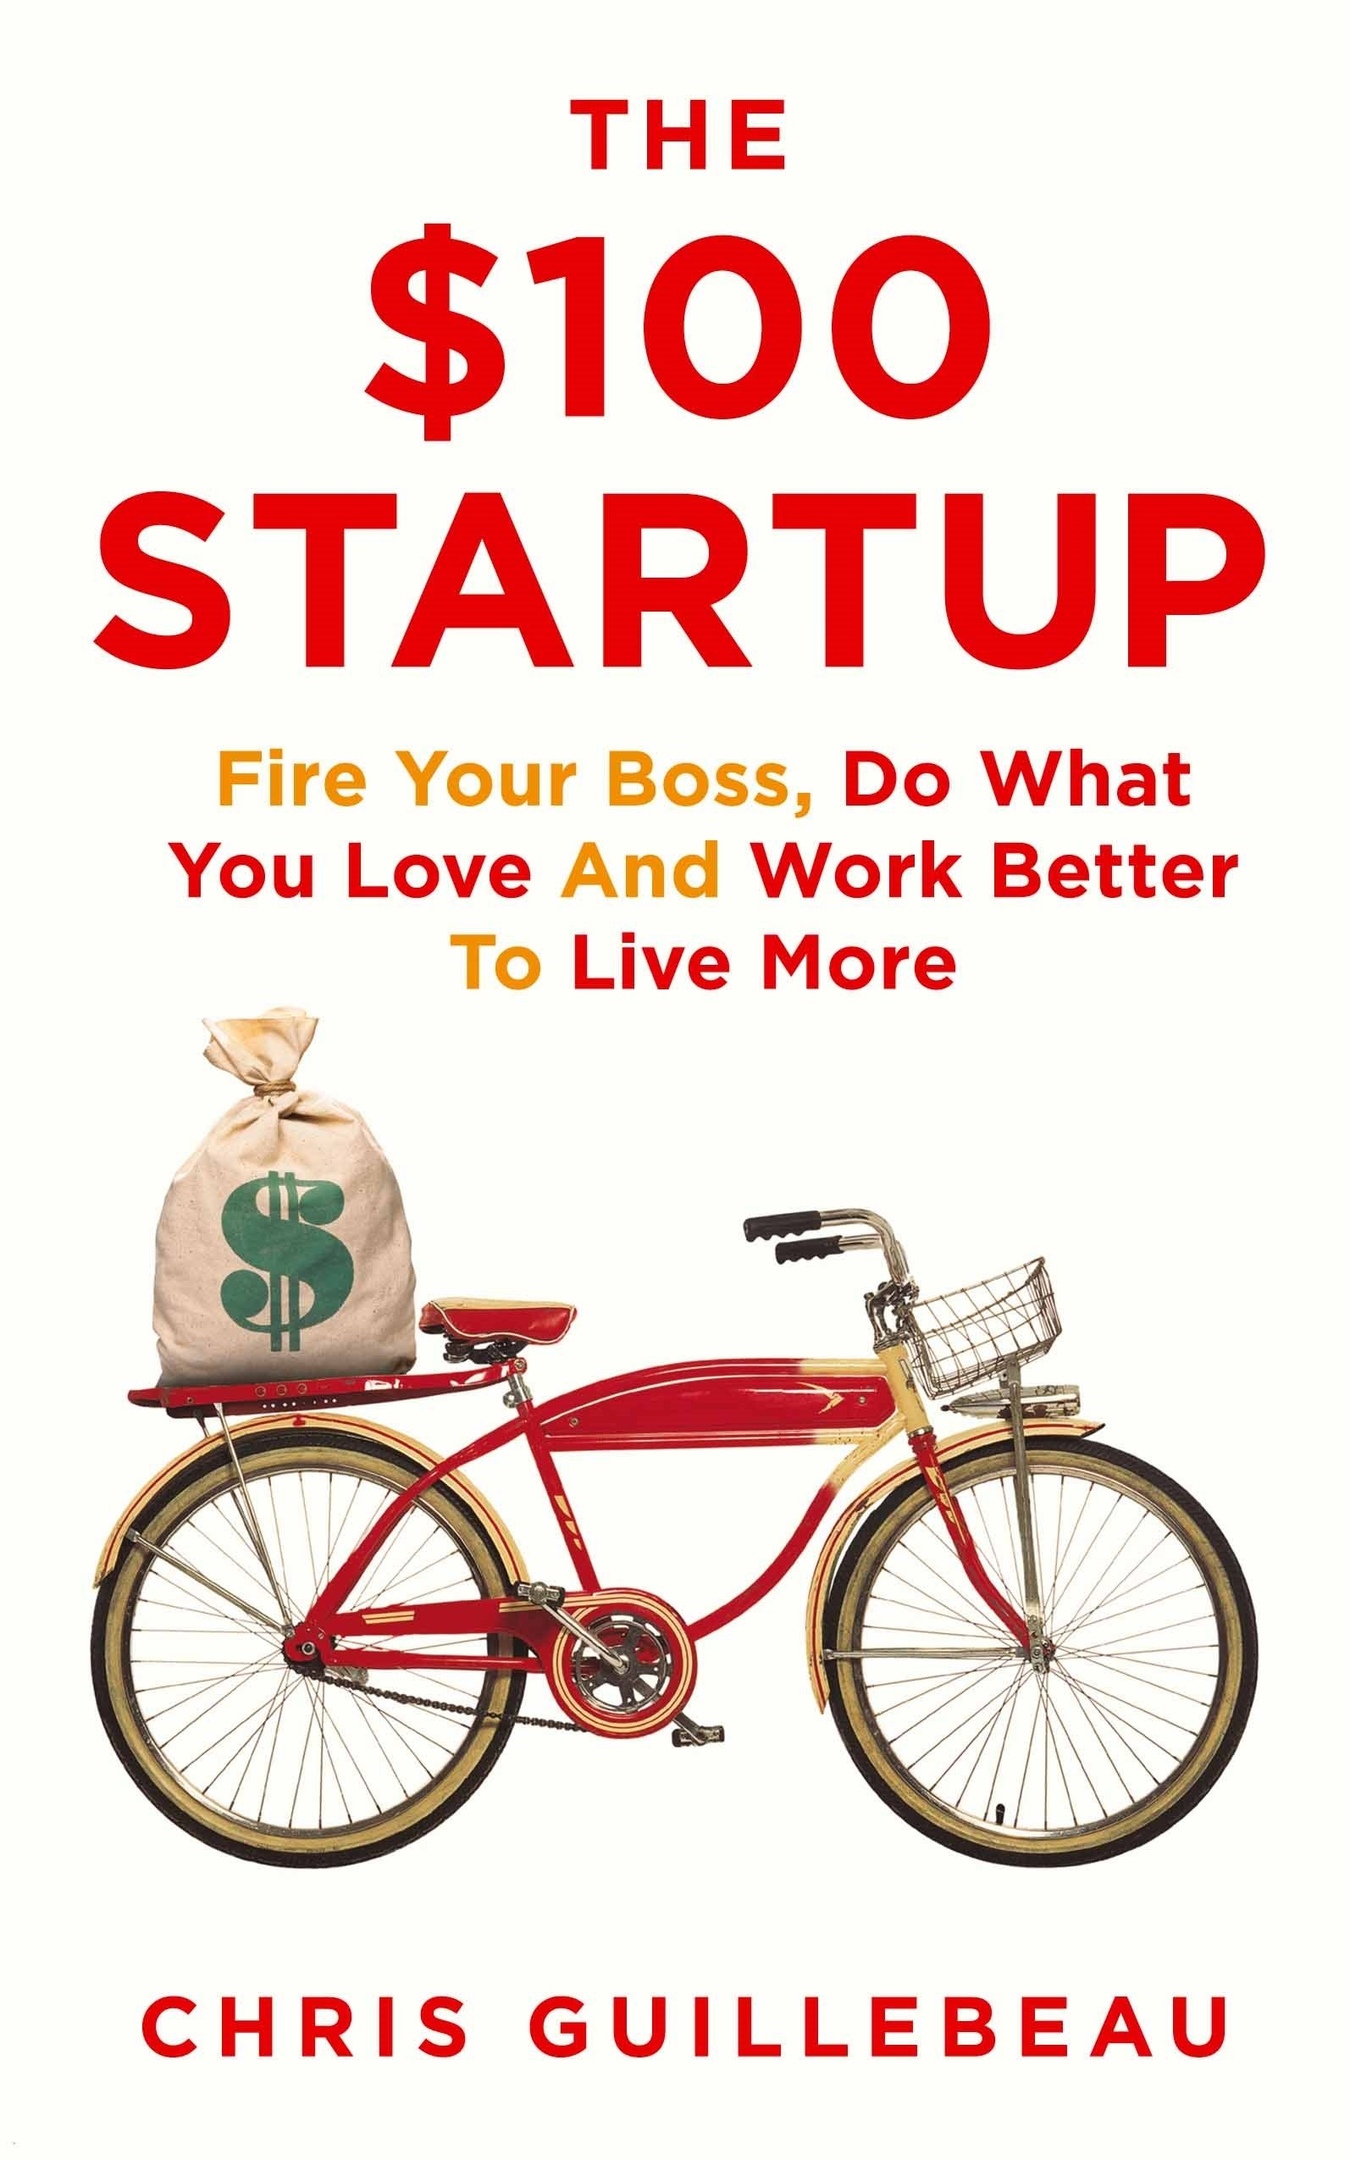 Chris Guillebeau – The $100 Startup